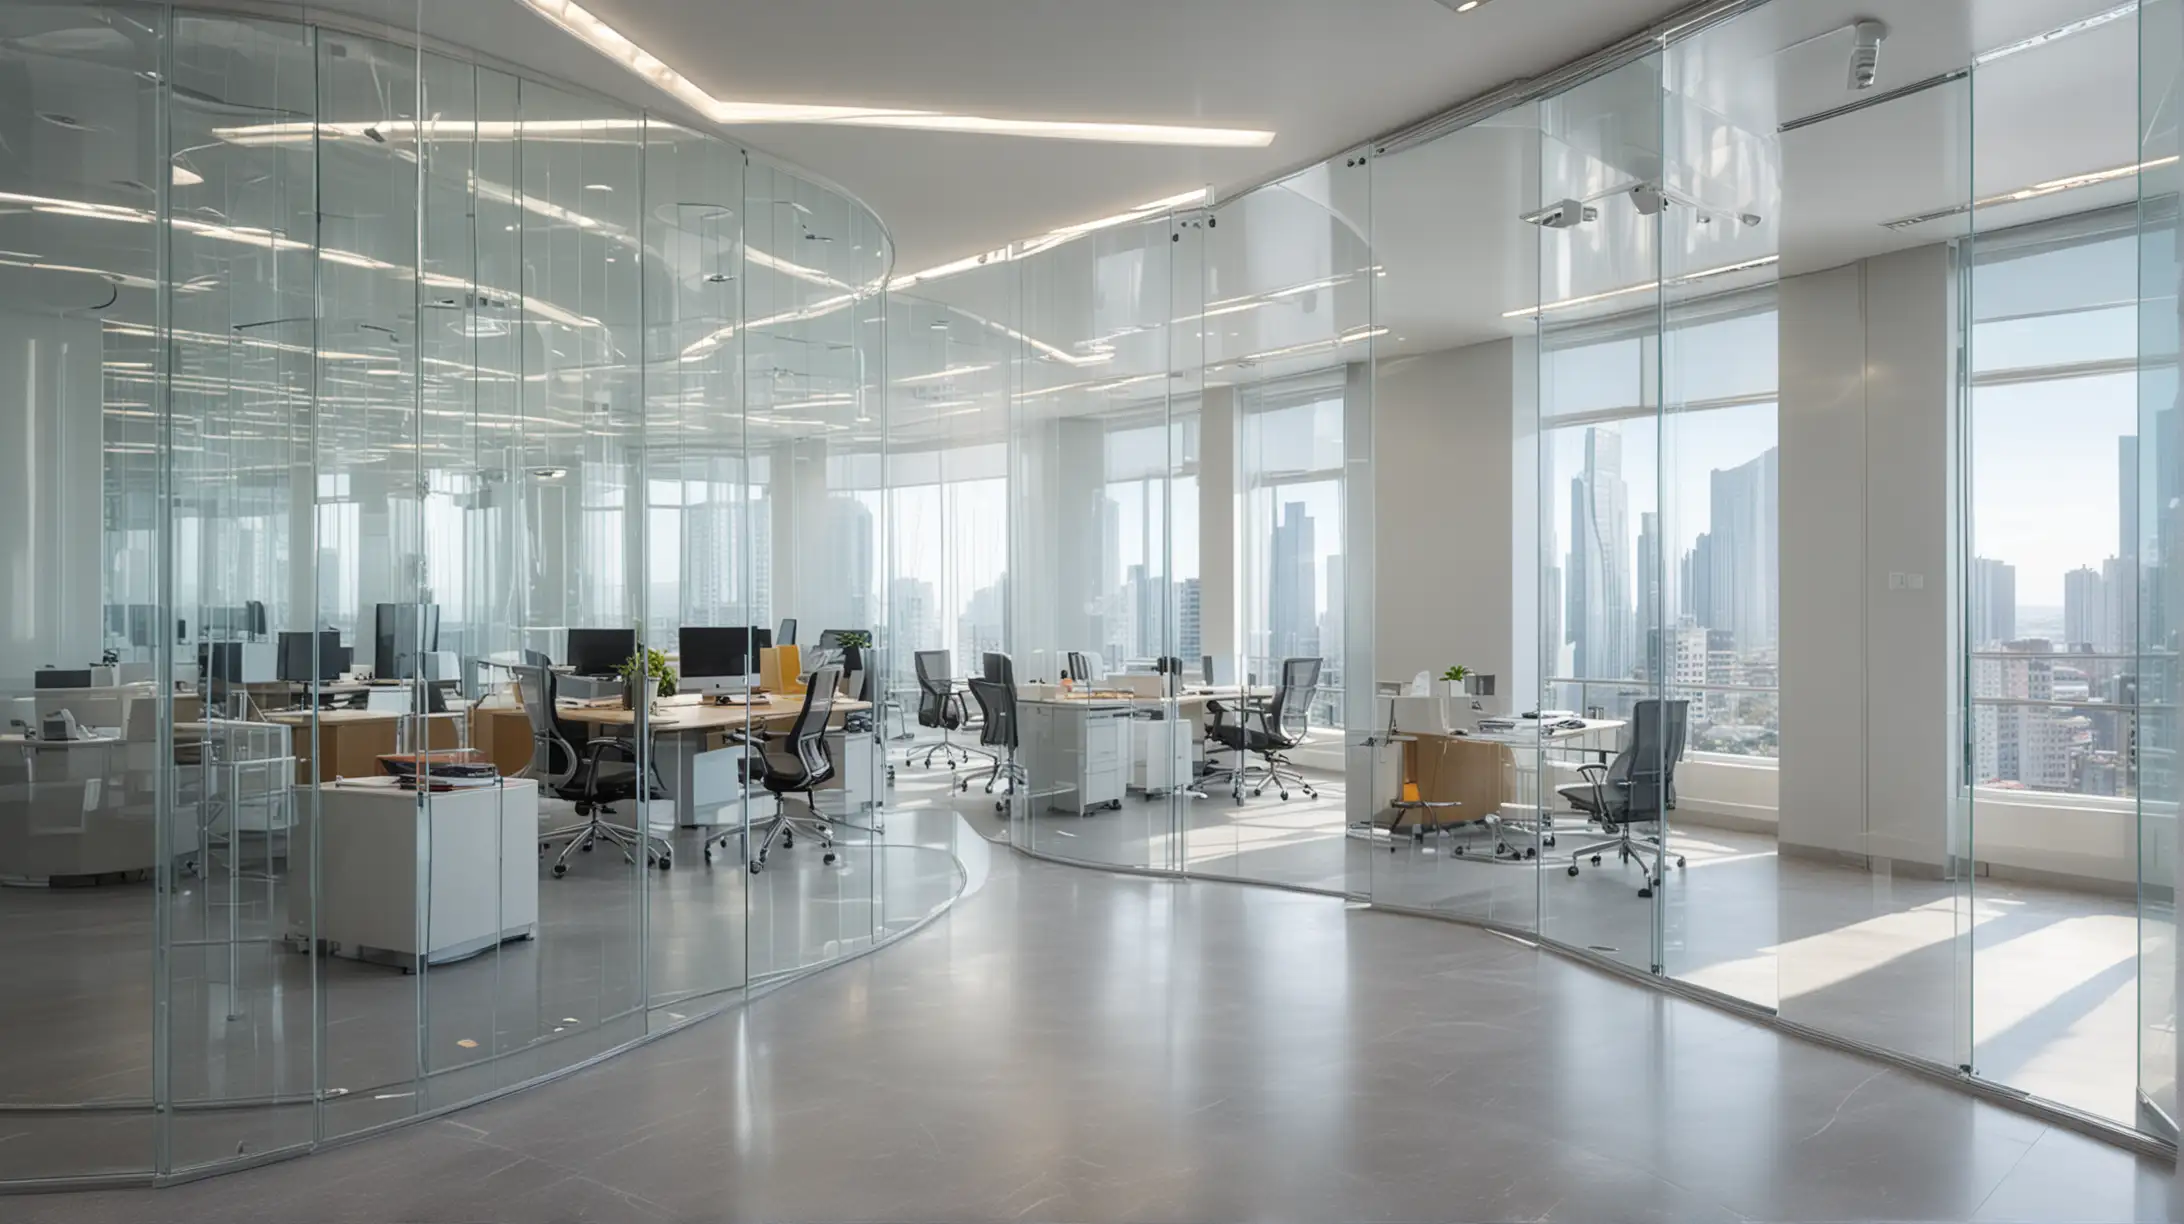 Professional photos of see-through Curved glass Partition wall, and sunny long lens office decoration, perfect perspective, highly detailed, wide-angle lens, surreal, light luxury decoration style, gray floor, white ceiling, polarized filters, natural light, bright colors, everything is clearly focused, HDR, UHD, 64K